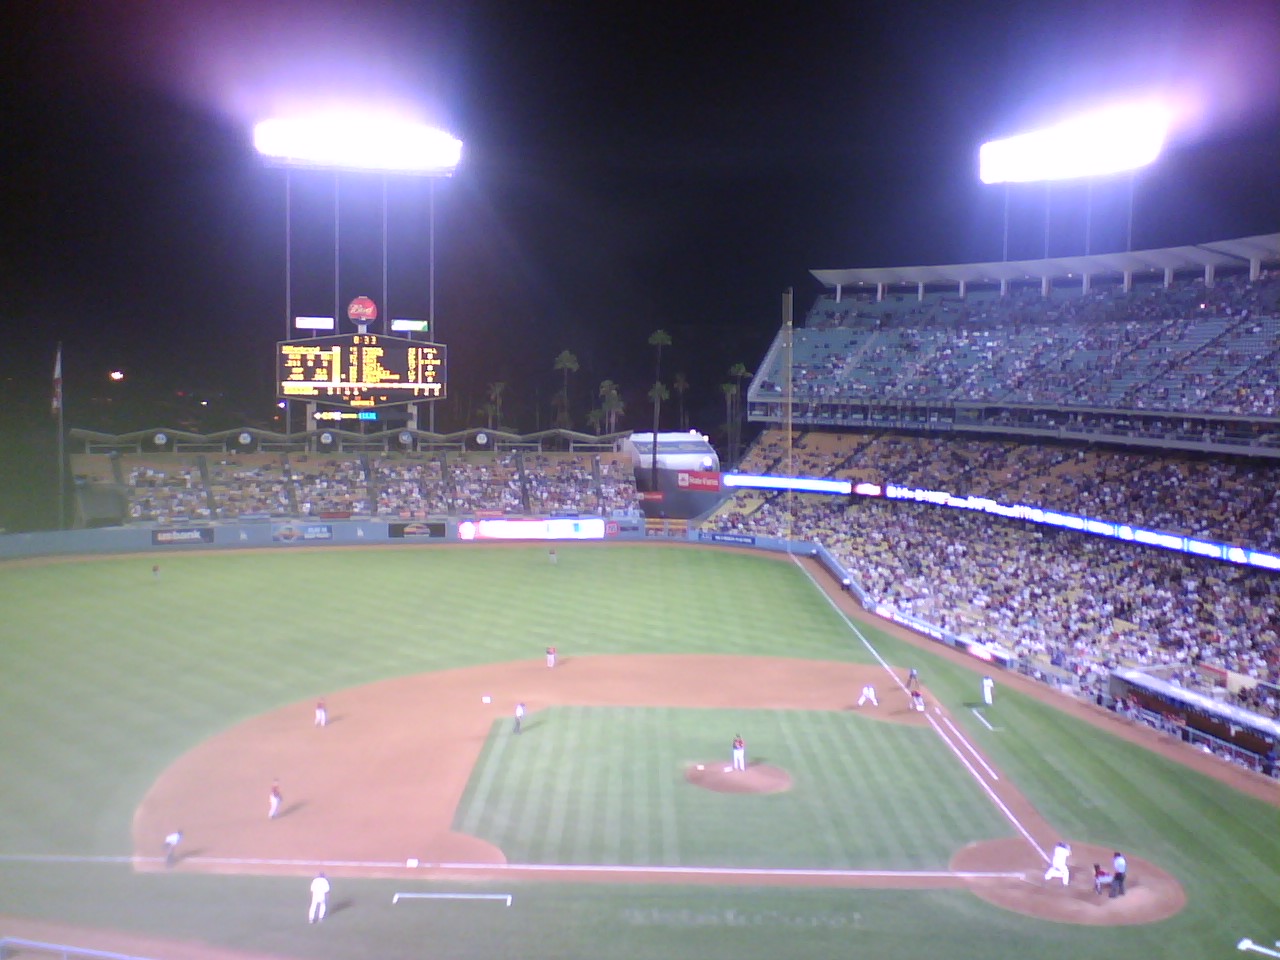 there is a view of a baseball game in the stadium